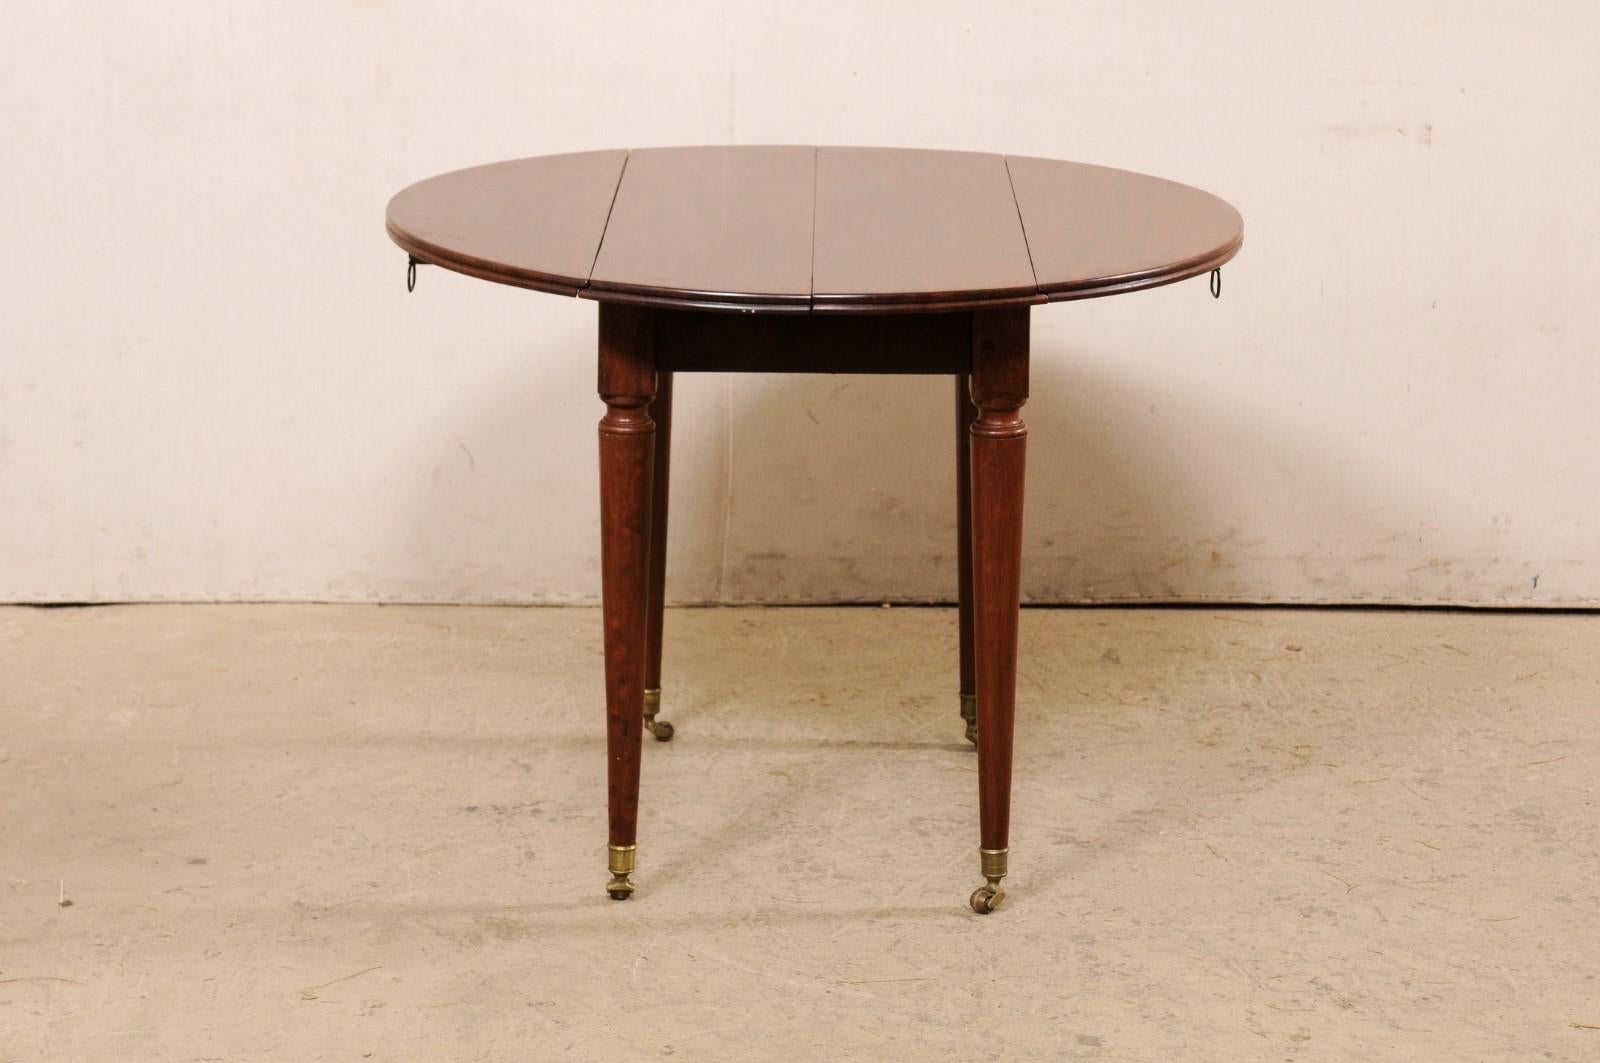 French 19th C. Mahogany Round Table W/Drop Leaves & Petite Brass Caster Feet For Sale 6